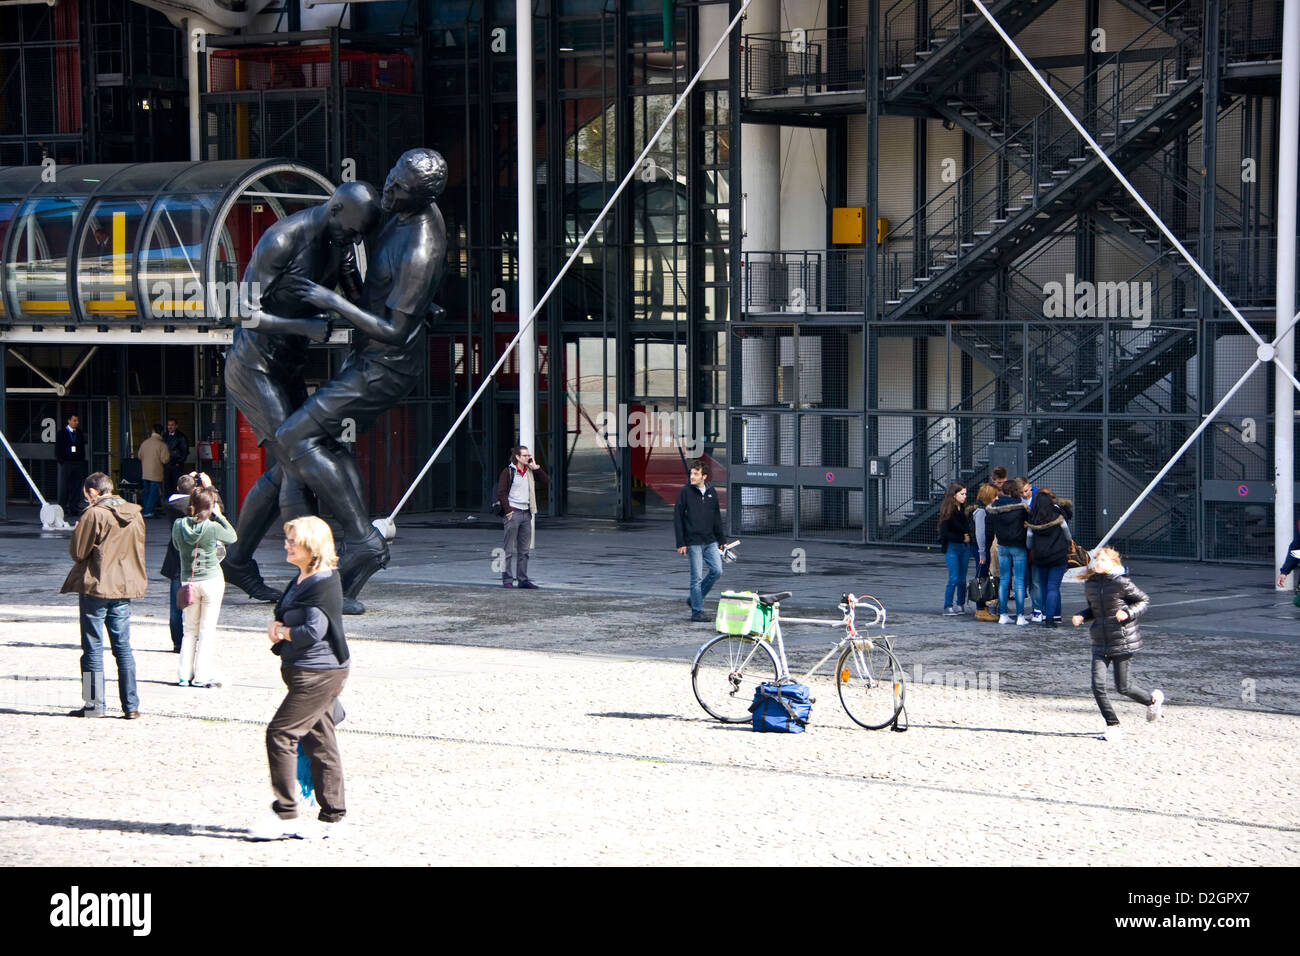 Statue of Zidane's headbutt of Marco Materazzi in a world cup match against Italy in 2006 Centre Georges Pompidou Paris France Stock Photo